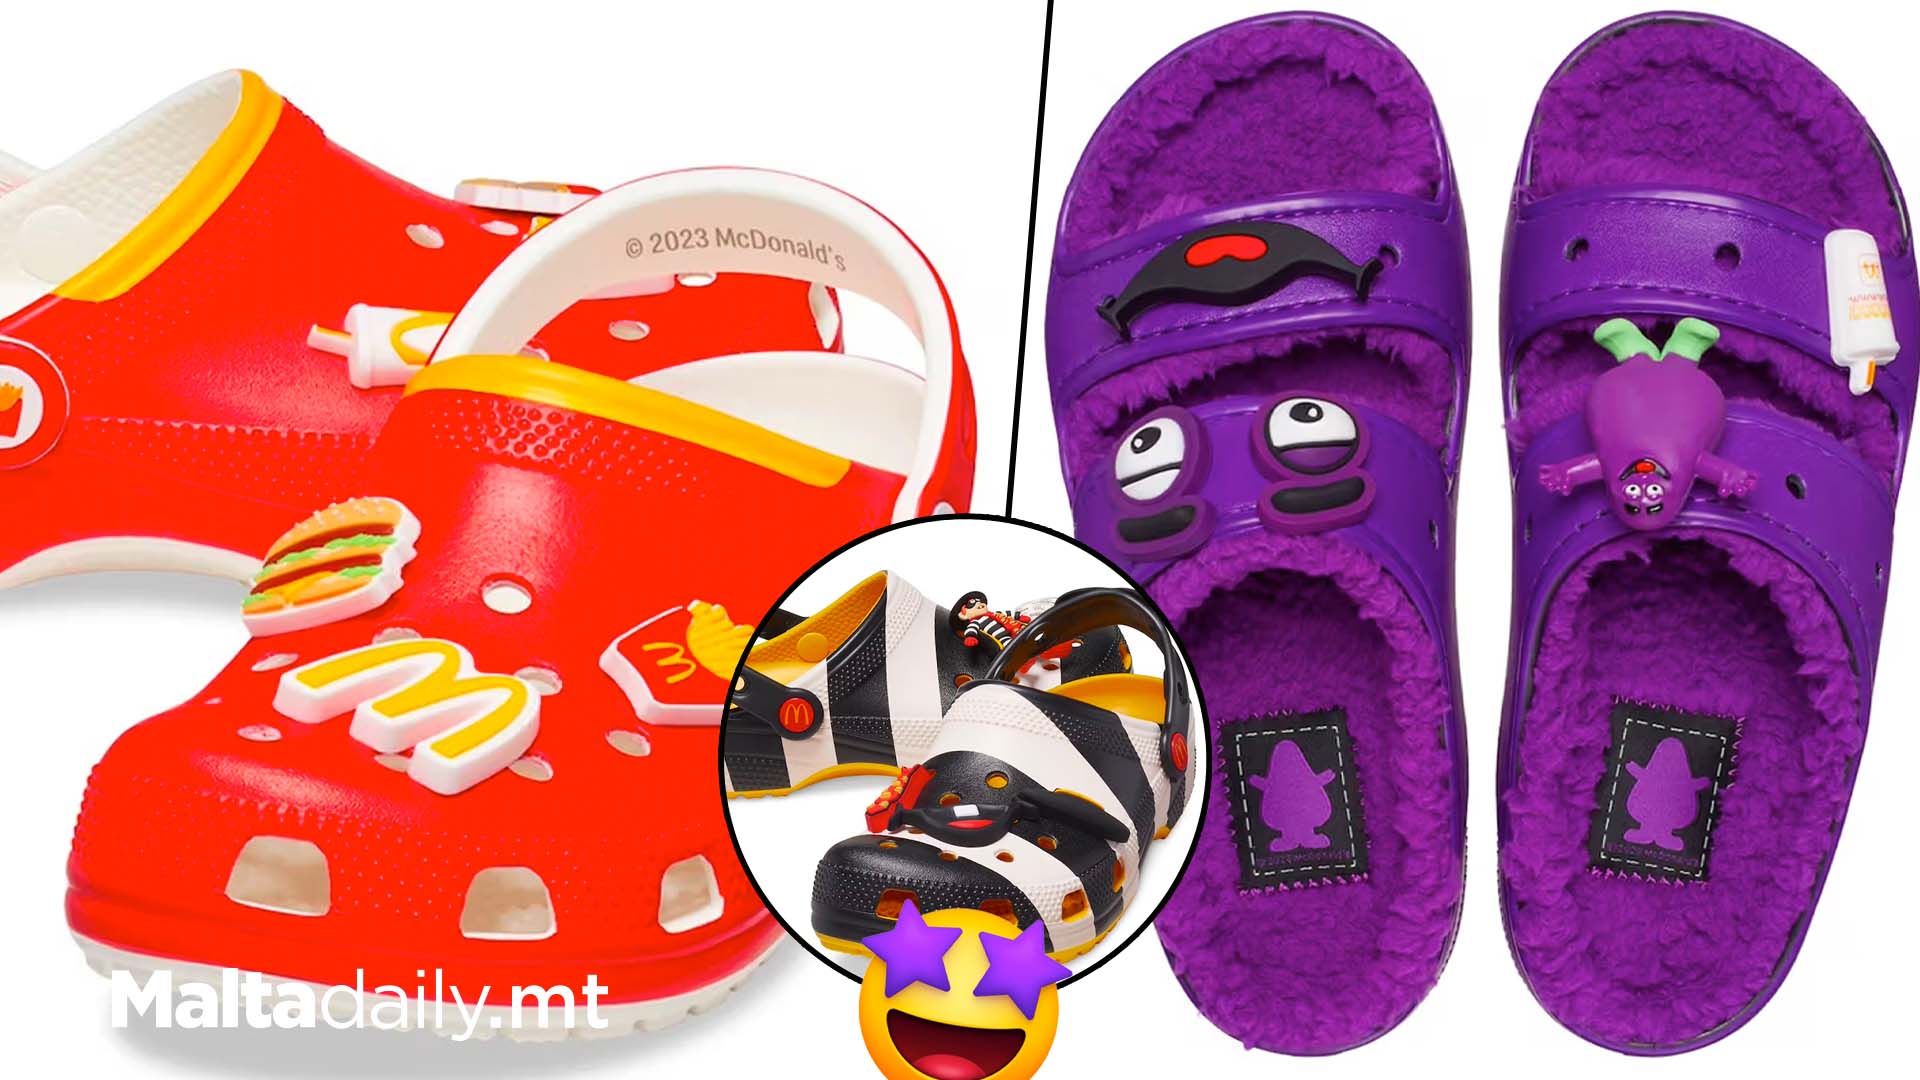 McDonald's Is Dropping A CROCS Collaboration